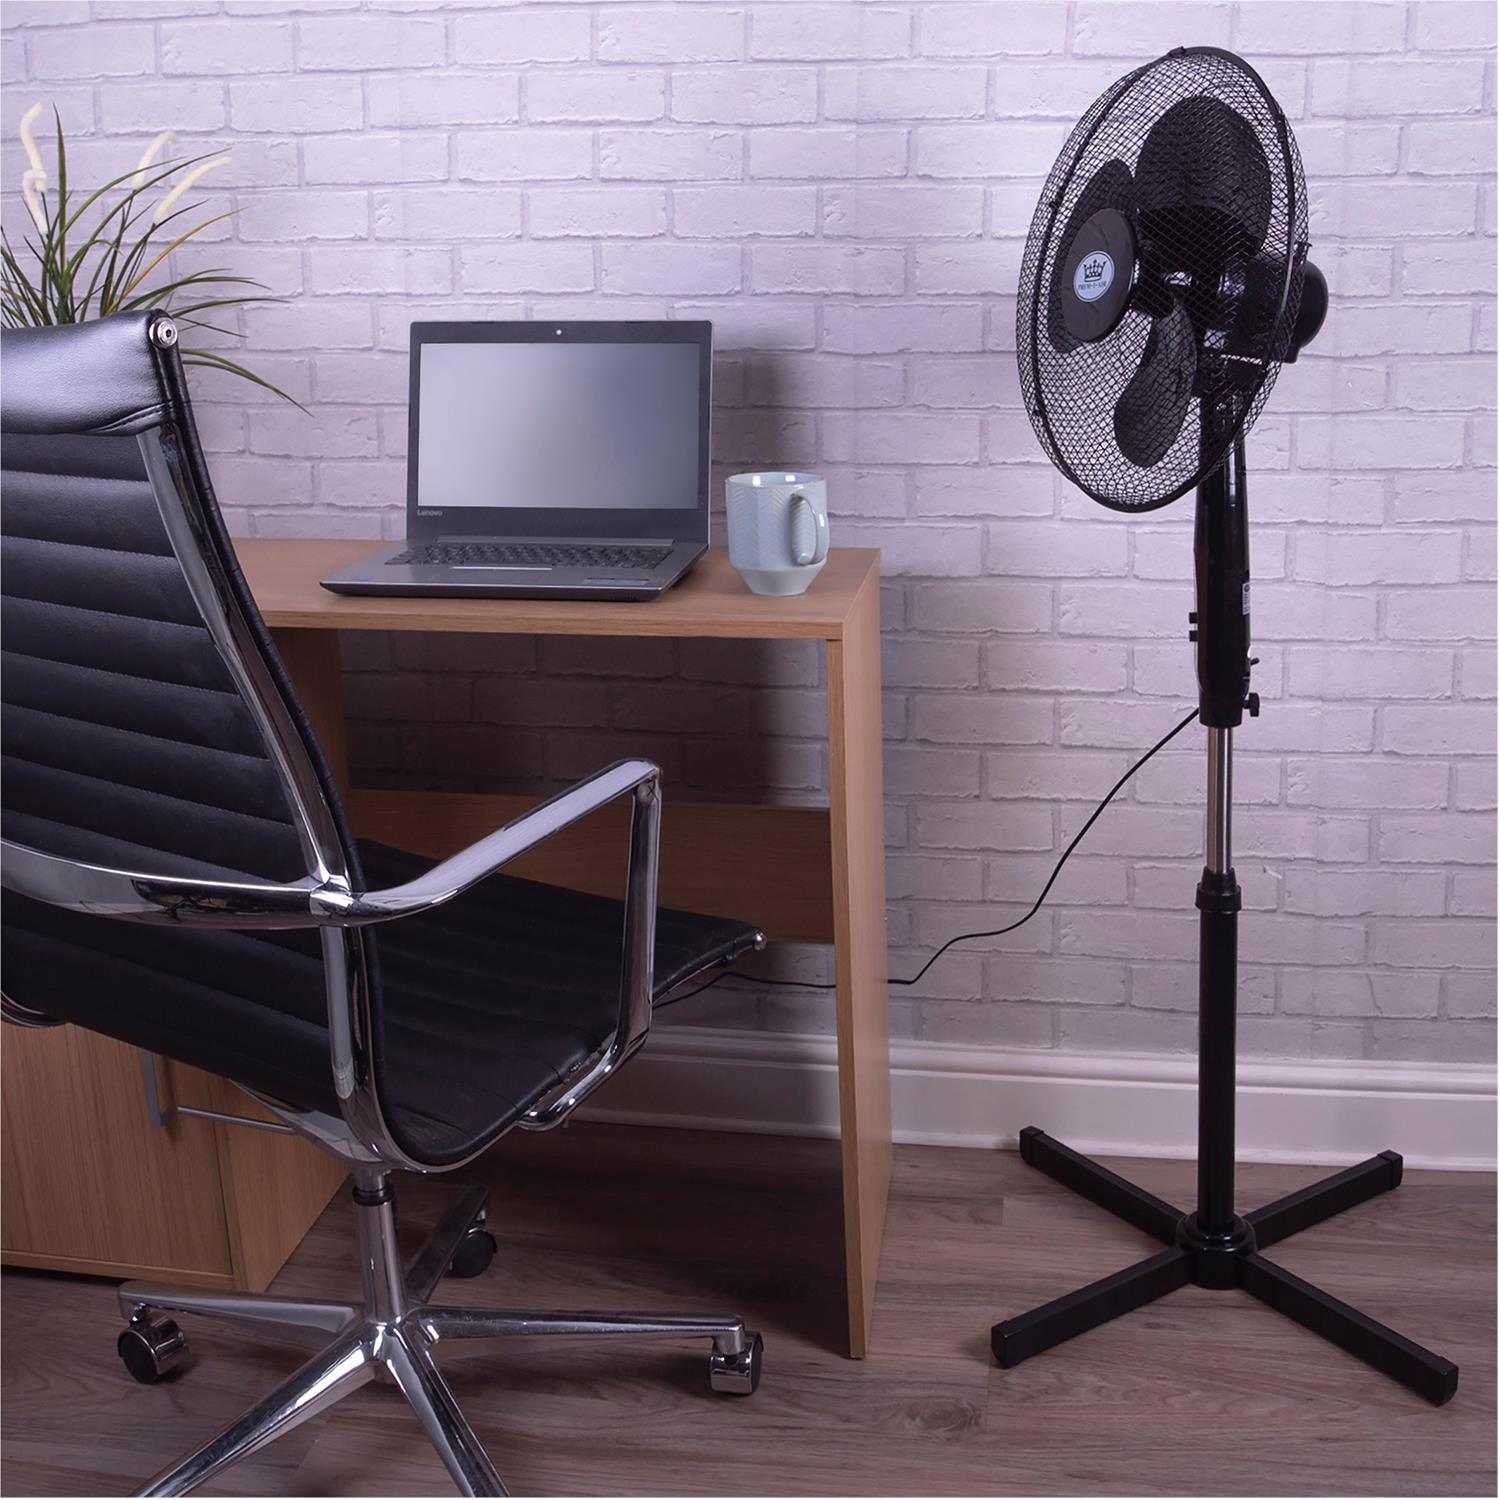 Prem-I-Air 16" 40 cm Black Height Adjustable Oscillating Pedestal Fan with Remote and Timer - DY Pro Audio